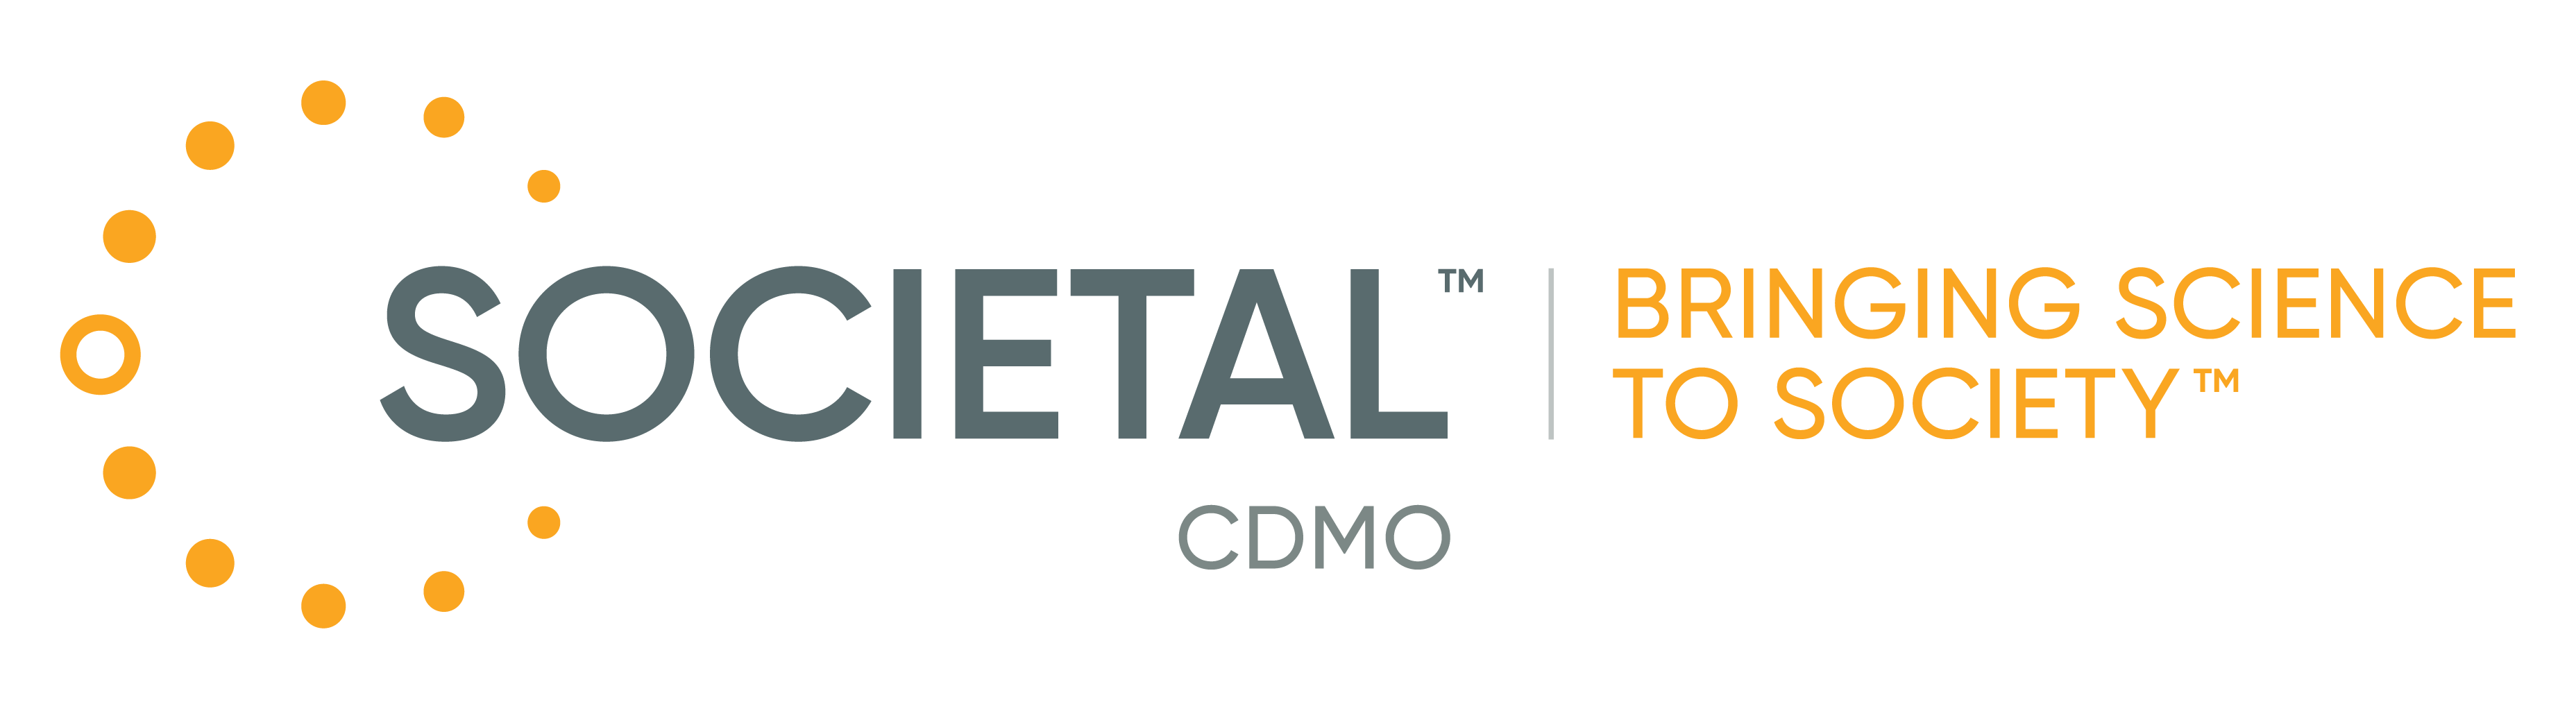 Societal CDMO Announces Expansion of Controlled Substance Manufacturing Capabilities to Address Expanding Psychedelic Drug Development Market